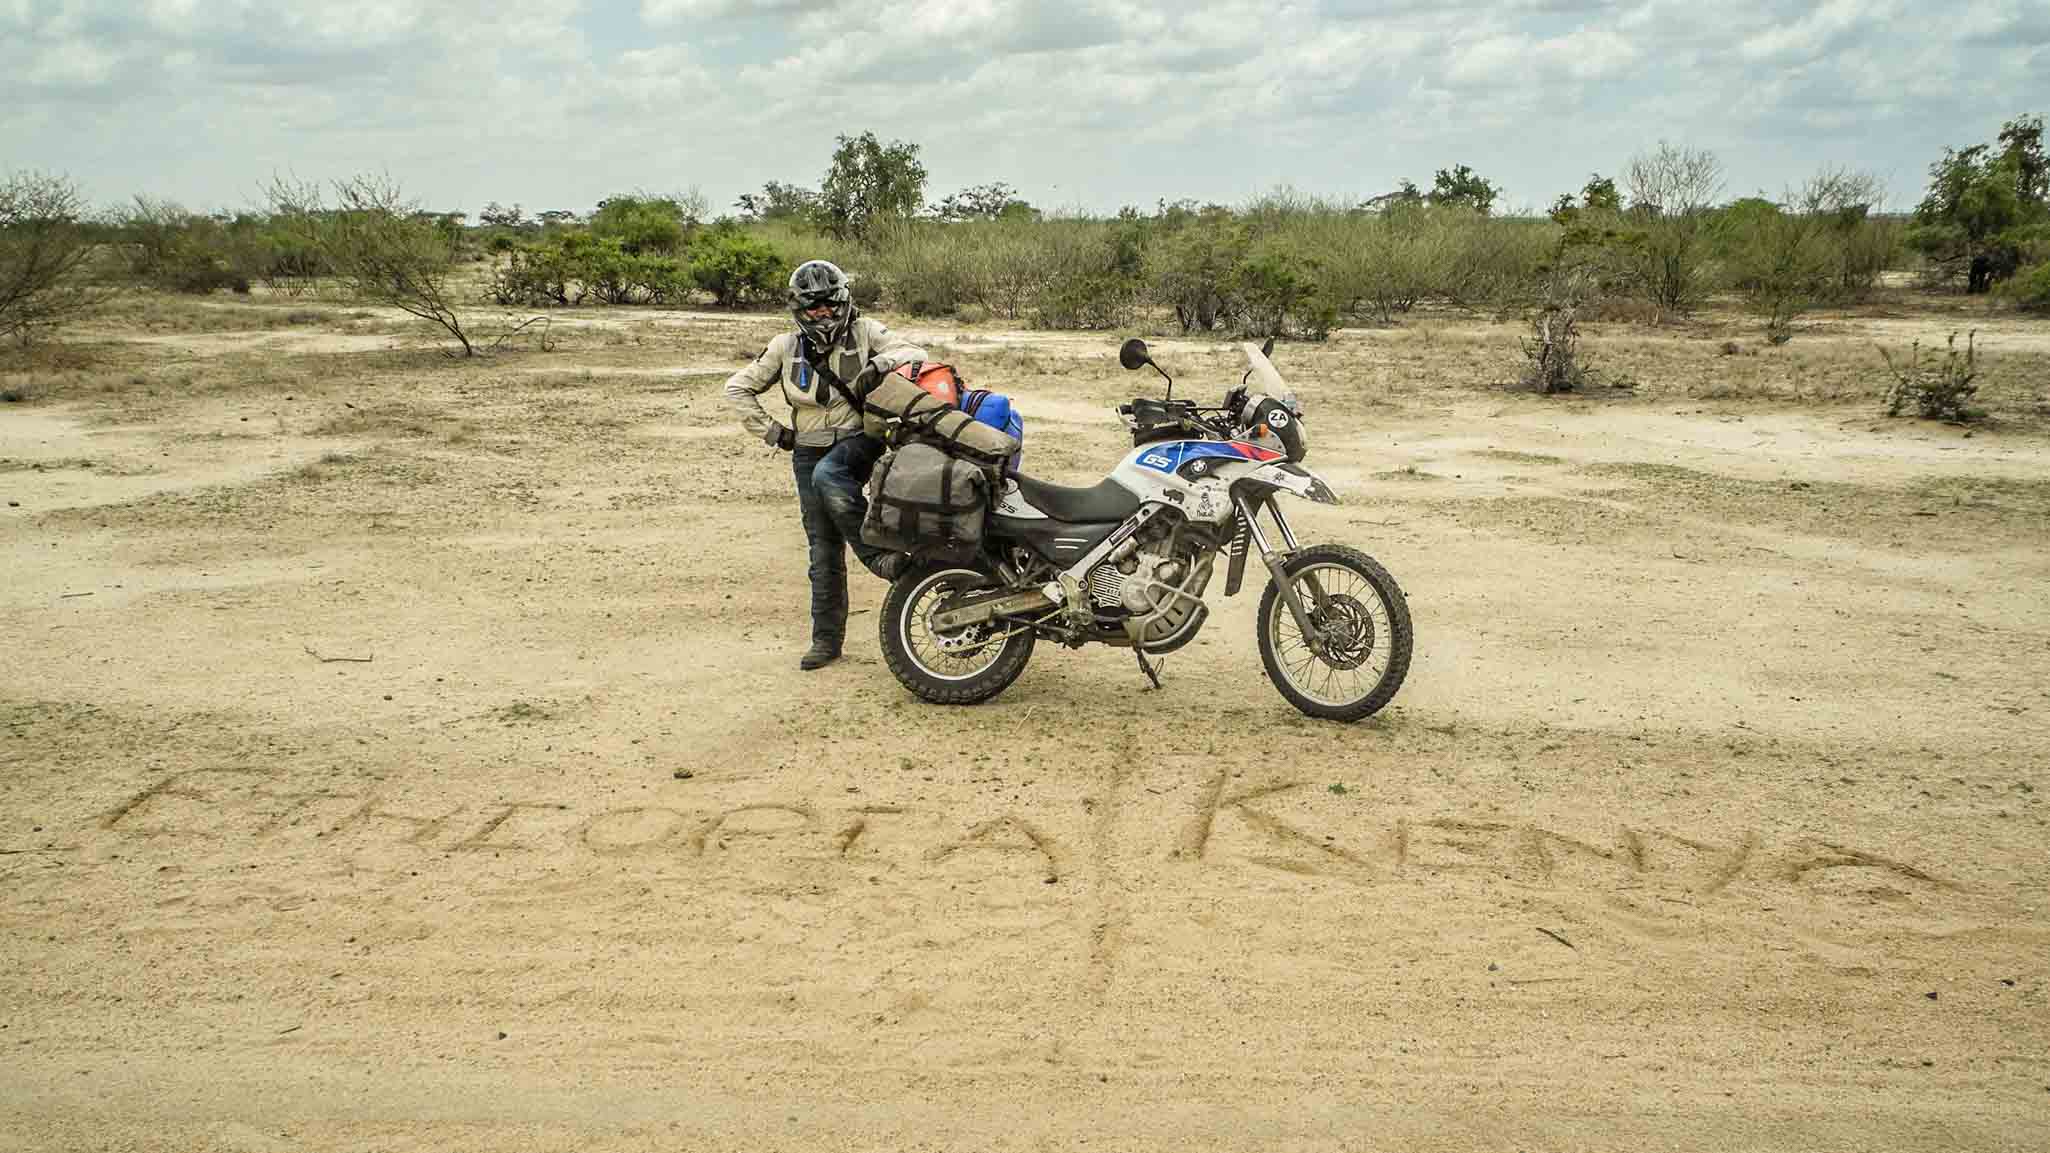 The official off road border between Ethiopia and Kenya